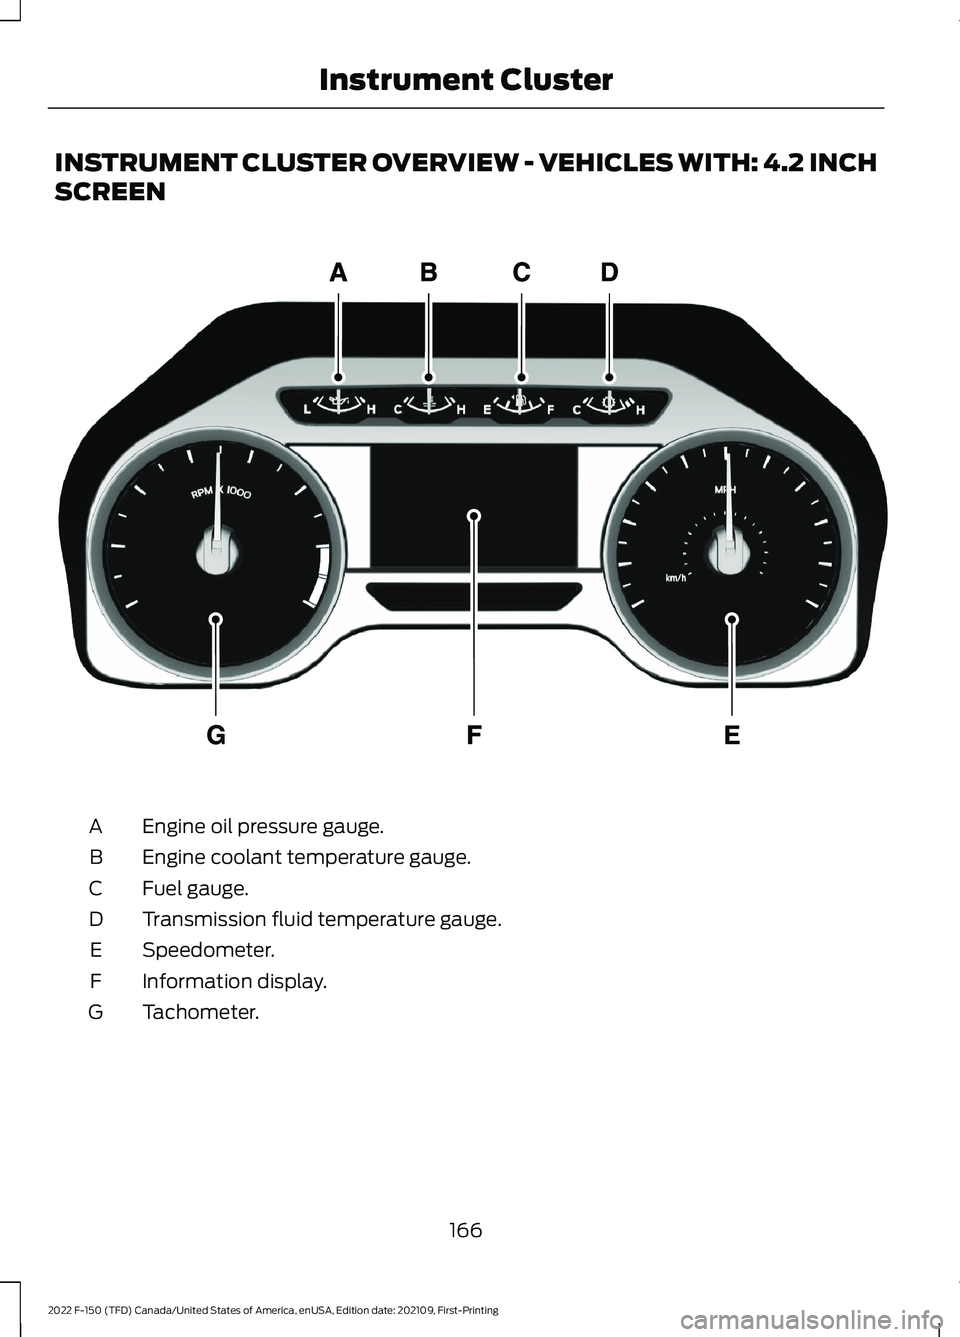 FORD F-150 2022  Owners Manual INSTRUMENT CLUSTER OVERVIEW - VEHICLES WITH: 4.2 INCH
SCREEN
Engine oil pressure gauge.
A
Engine coolant temperature gauge.
B
Fuel gauge.
C
Transmission fluid temperature gauge.
D
Speedometer.
E
Infor